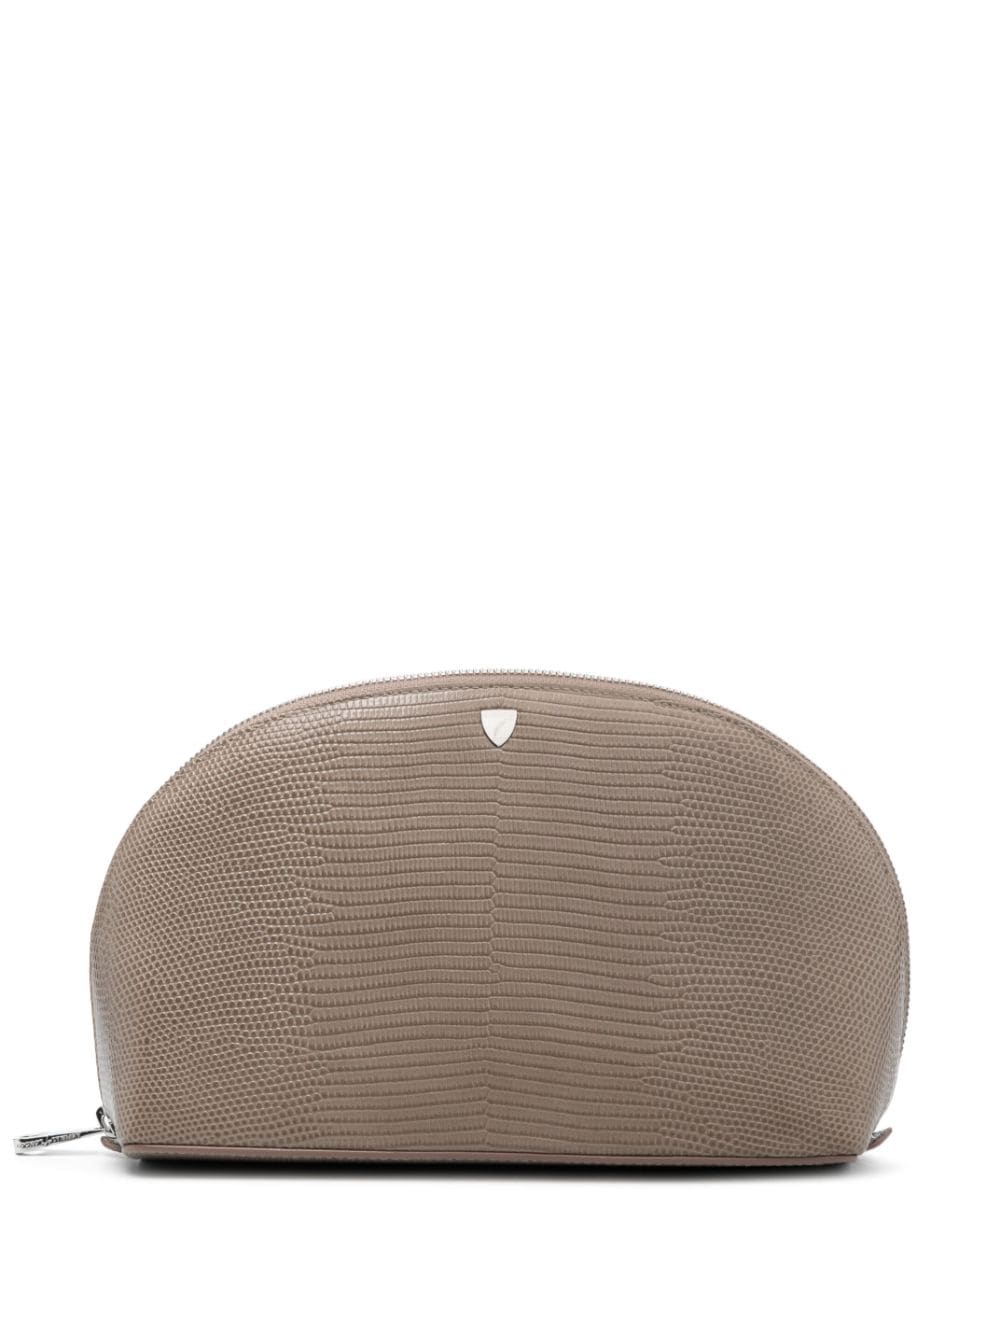 Aspinal Of London Madison leather make up bag - Neutrals von Aspinal Of London